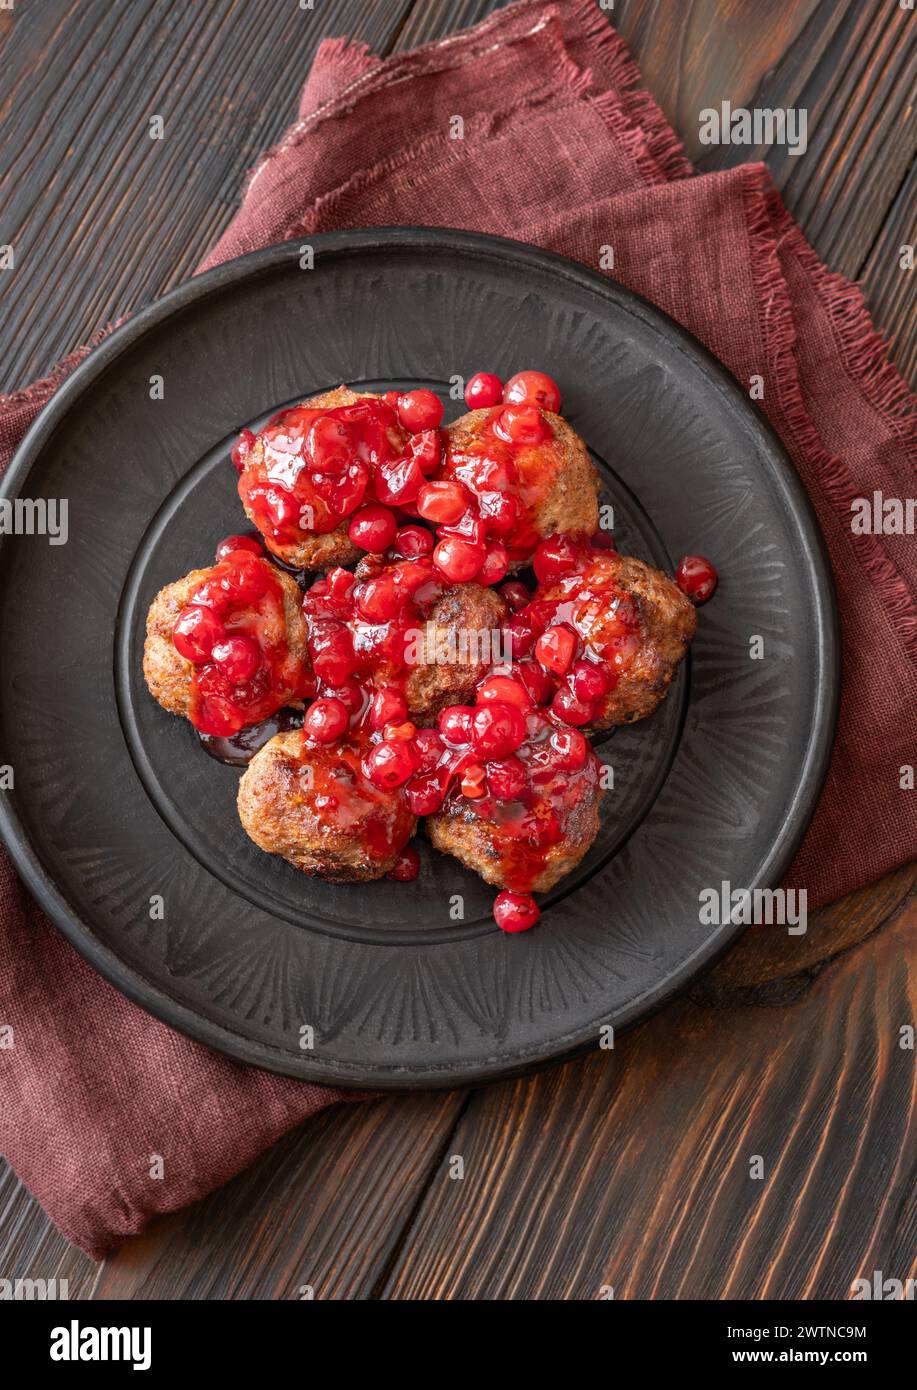 Portion of swedish meatballs with lingonberry sauce Stock Photo